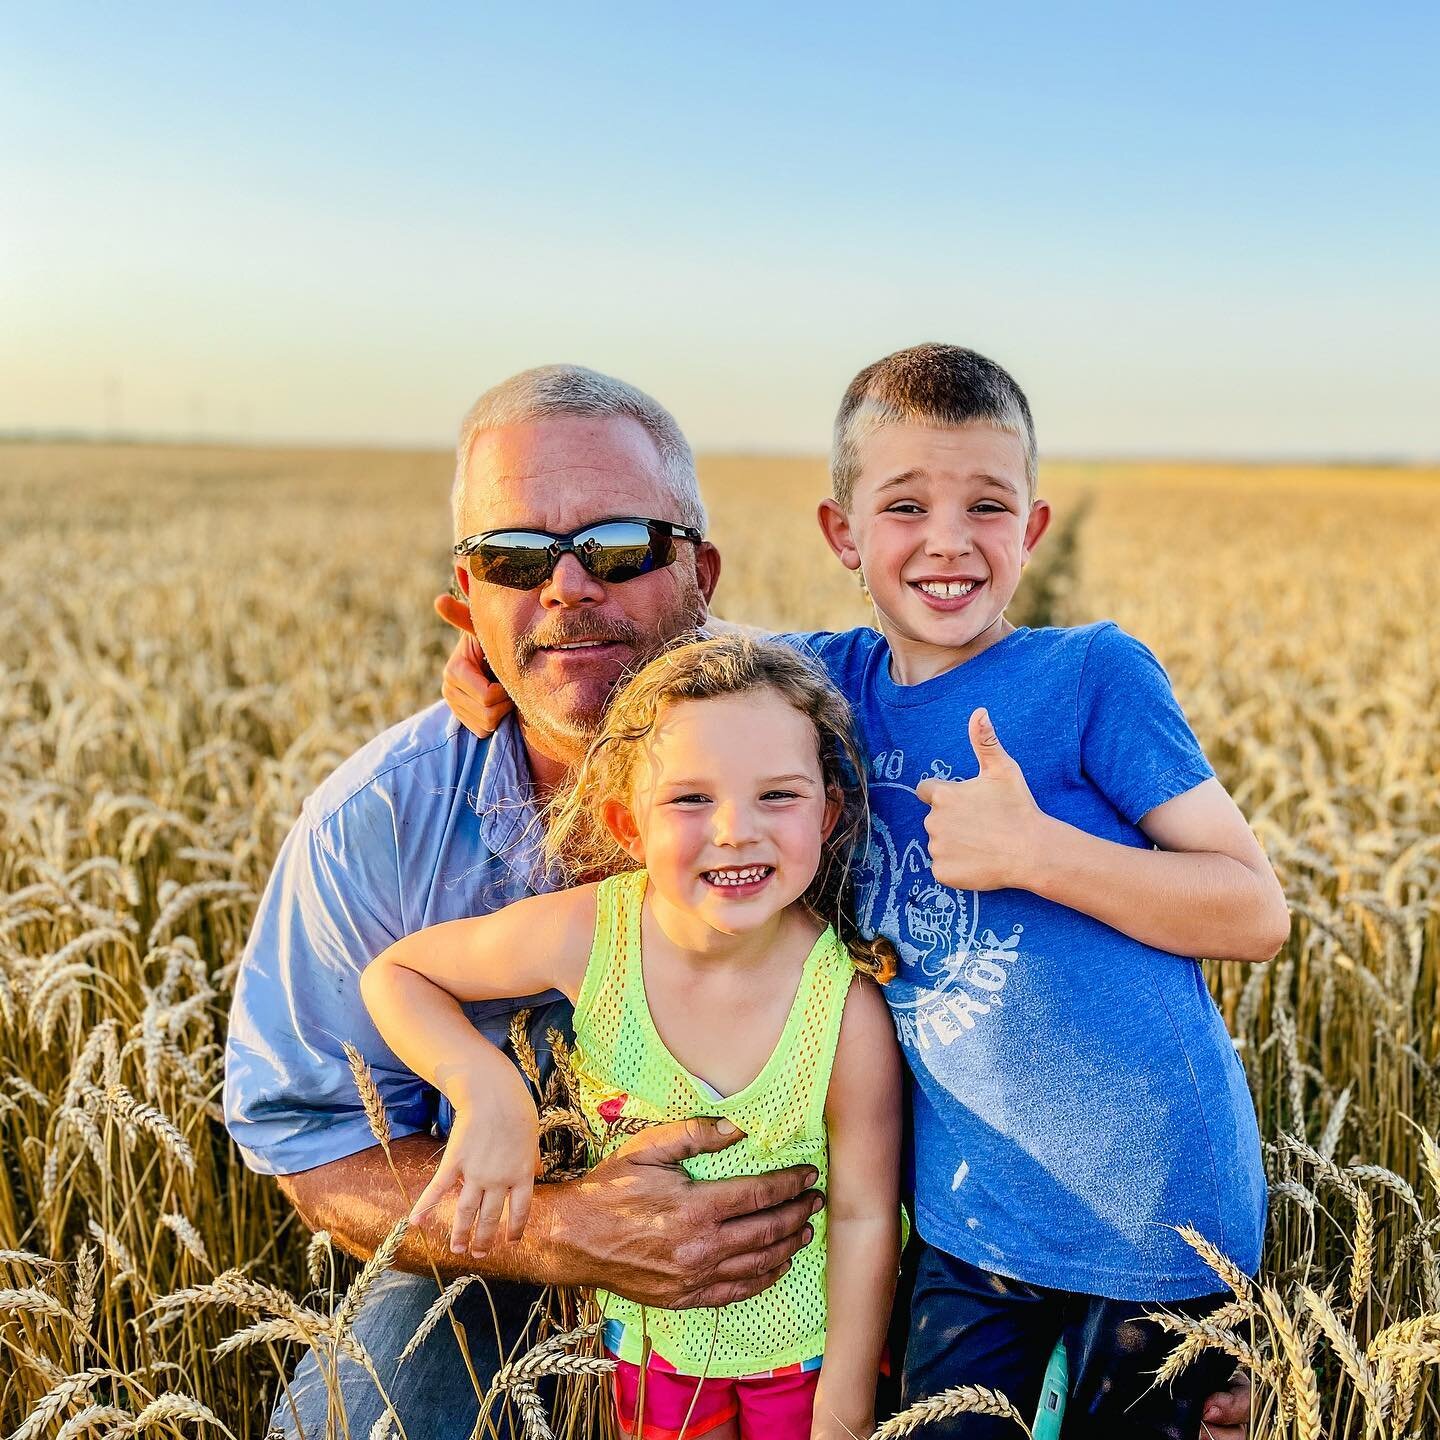 Here&rsquo;s to my most favorite guys - Happy Father&rsquo;s Day!

#fathersday #happyfathersday #farmingfamilies #wheatharvest #thisisoklahoma